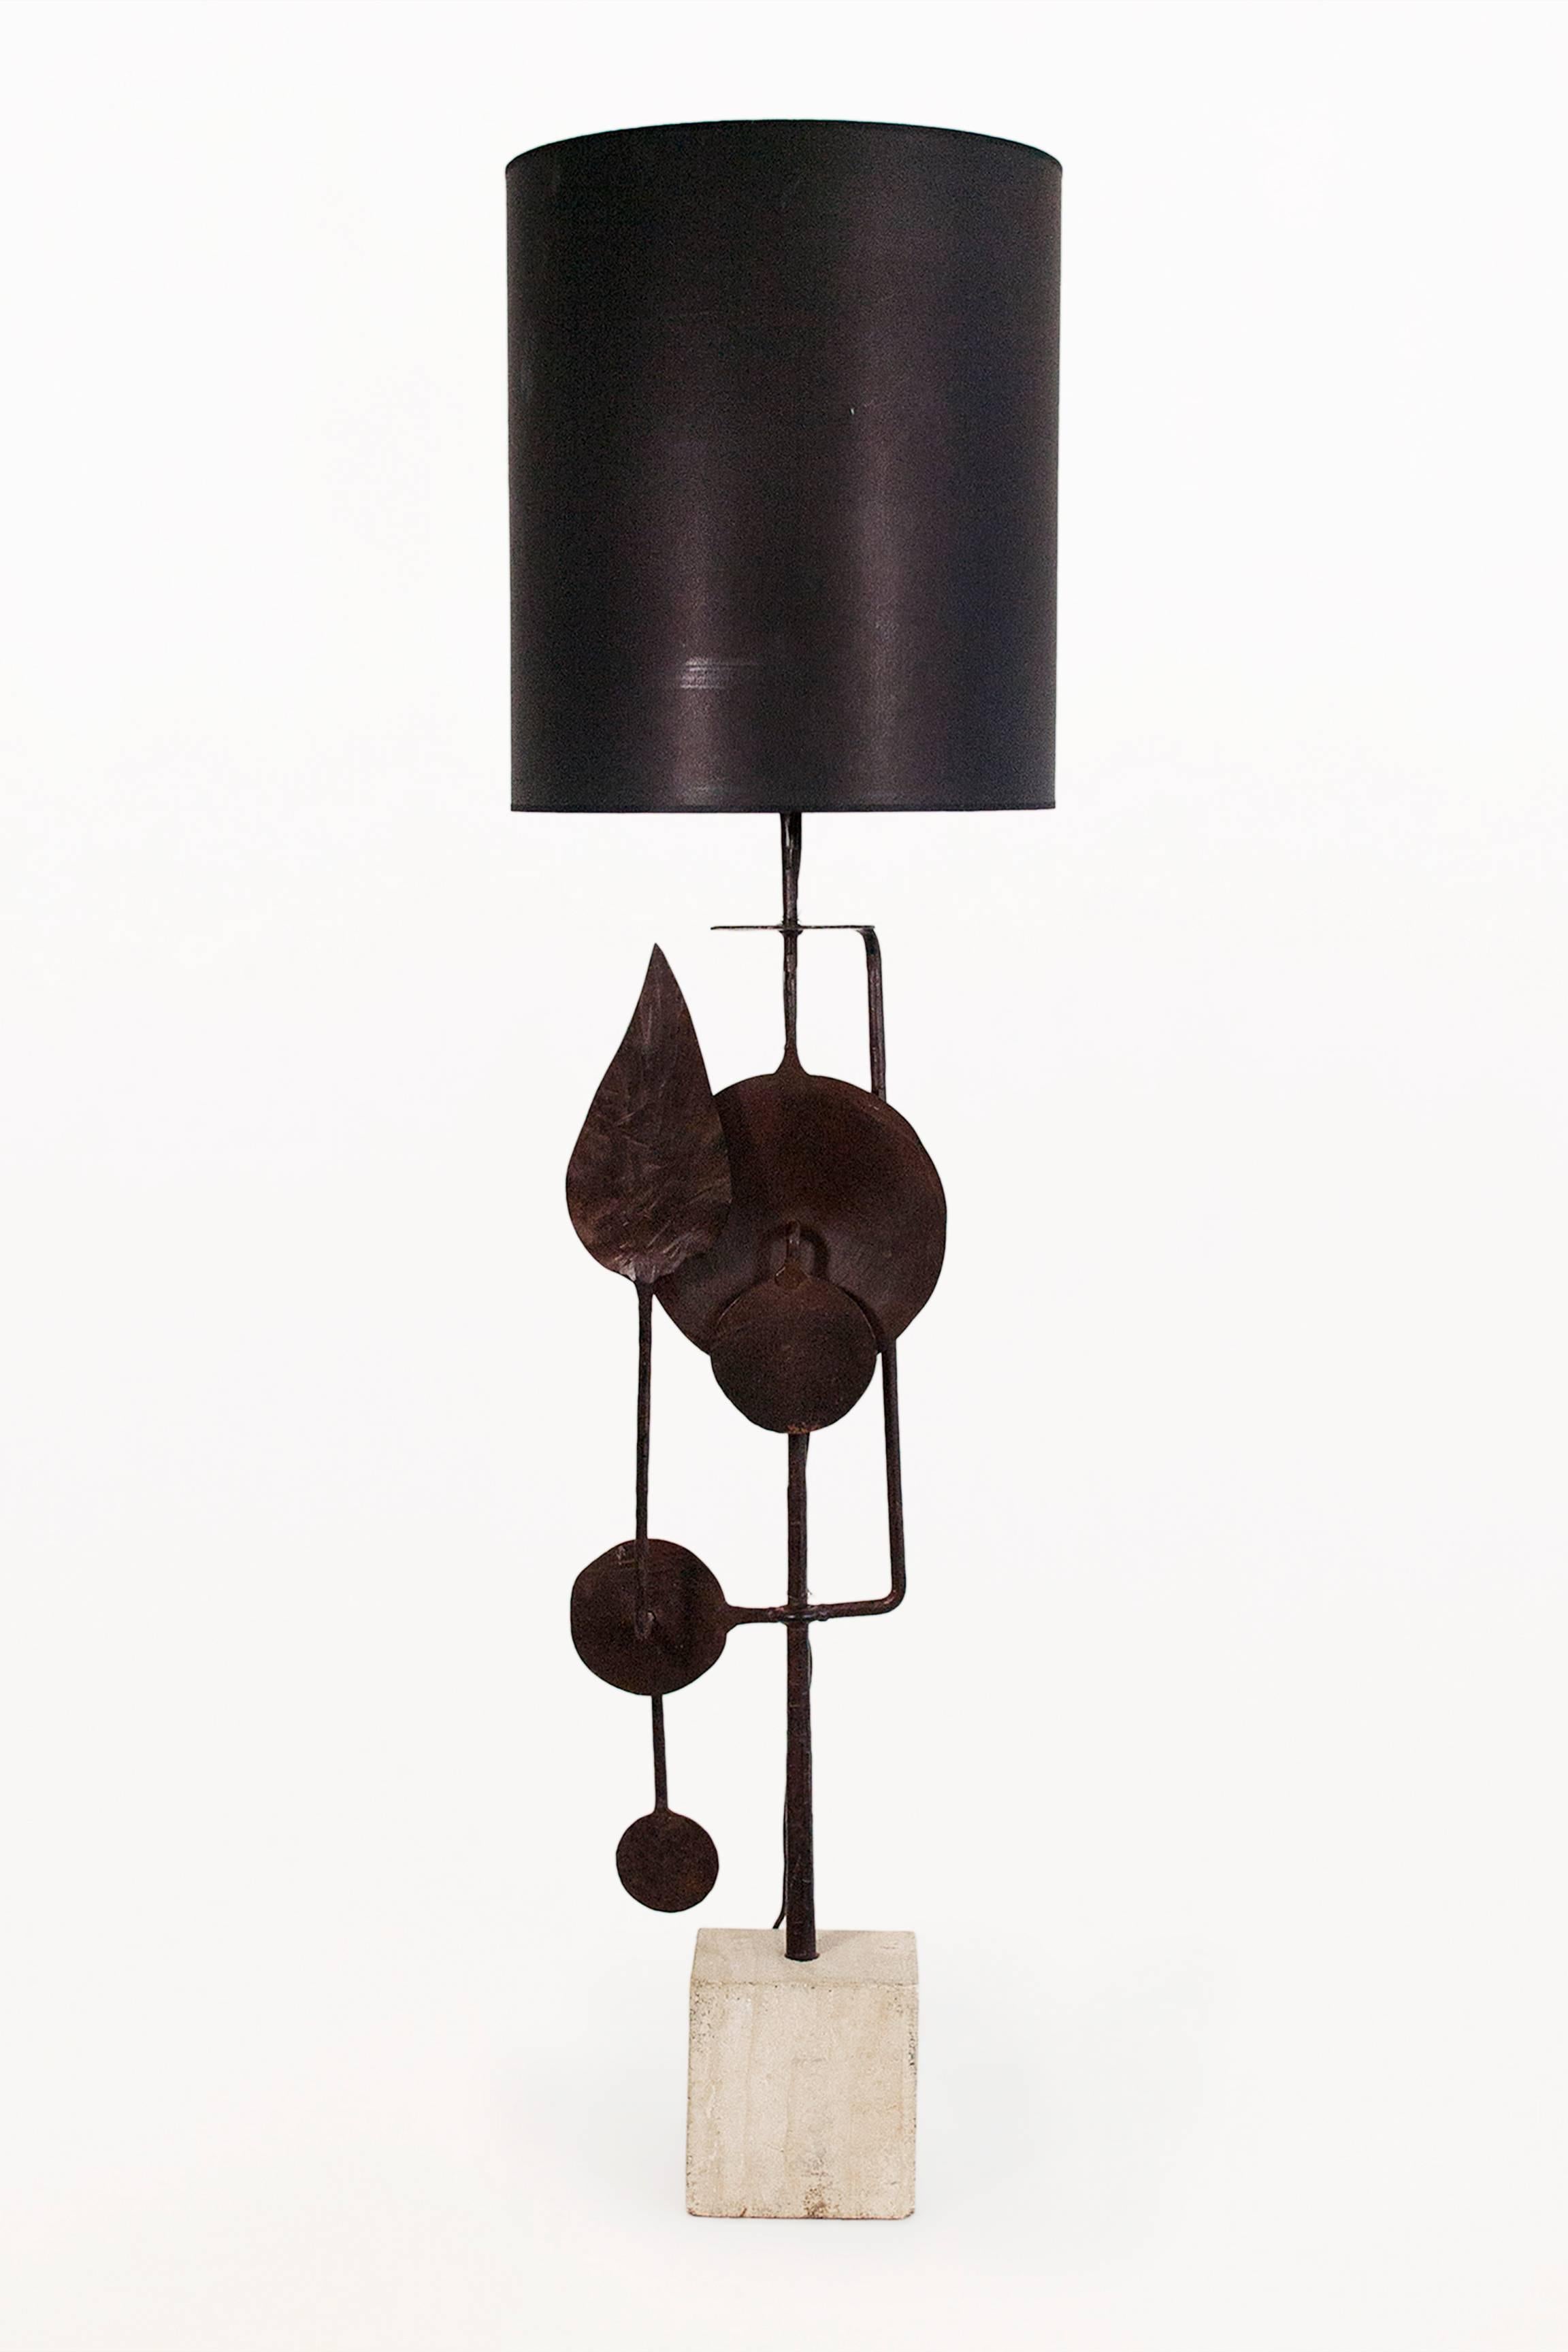 Very large sculptural table lamp by Giovanni Banci
Forged iron sculptural structure with rectangular travertine base,
circa 1970, Italy
Very good vintage condition.